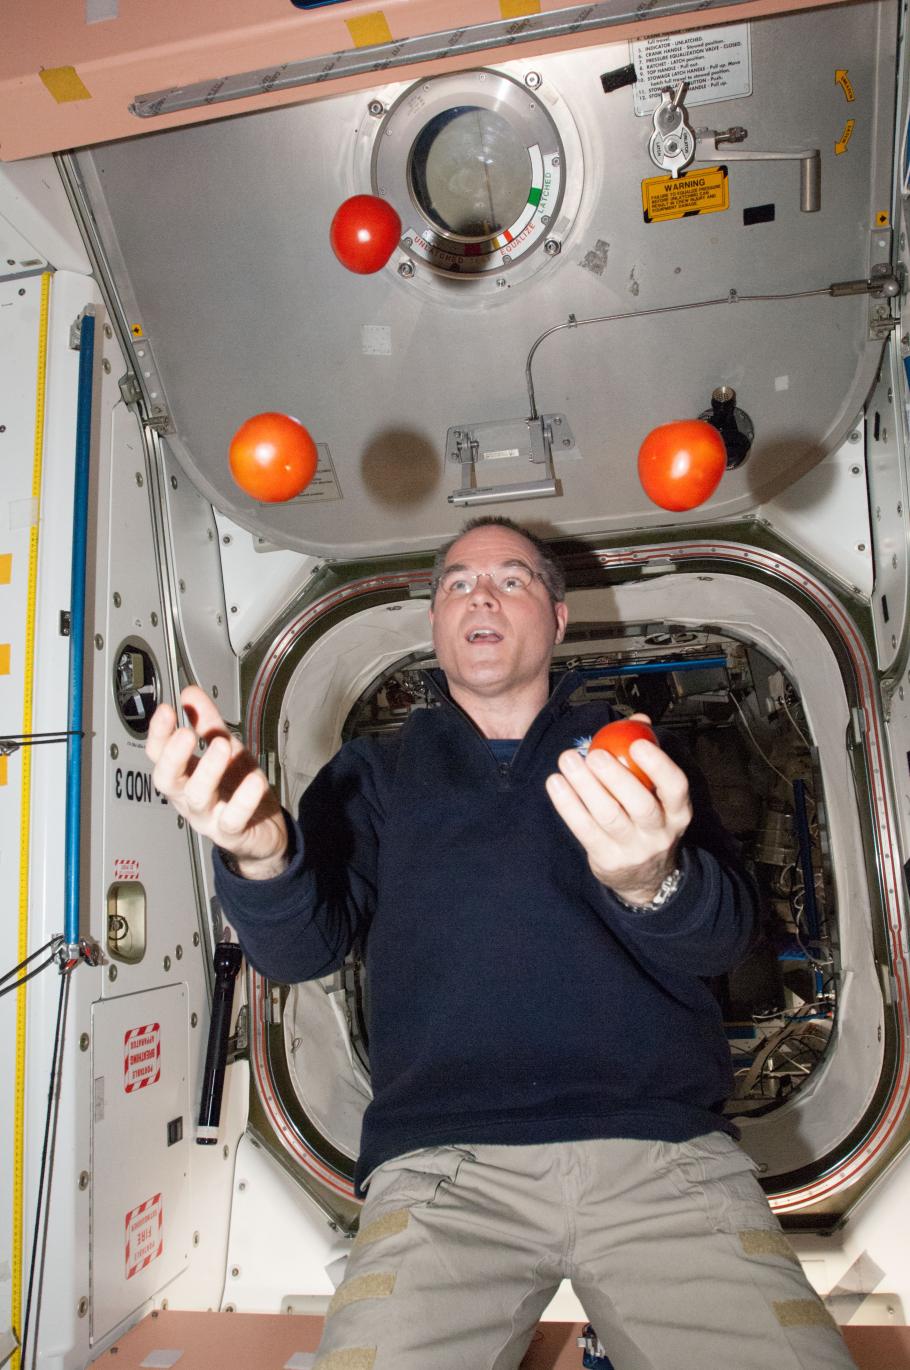 Expedition 34 Commander Kevin Ford juggles some tomatoes from a resupply spacecraft while aboard the ISS, 2013.